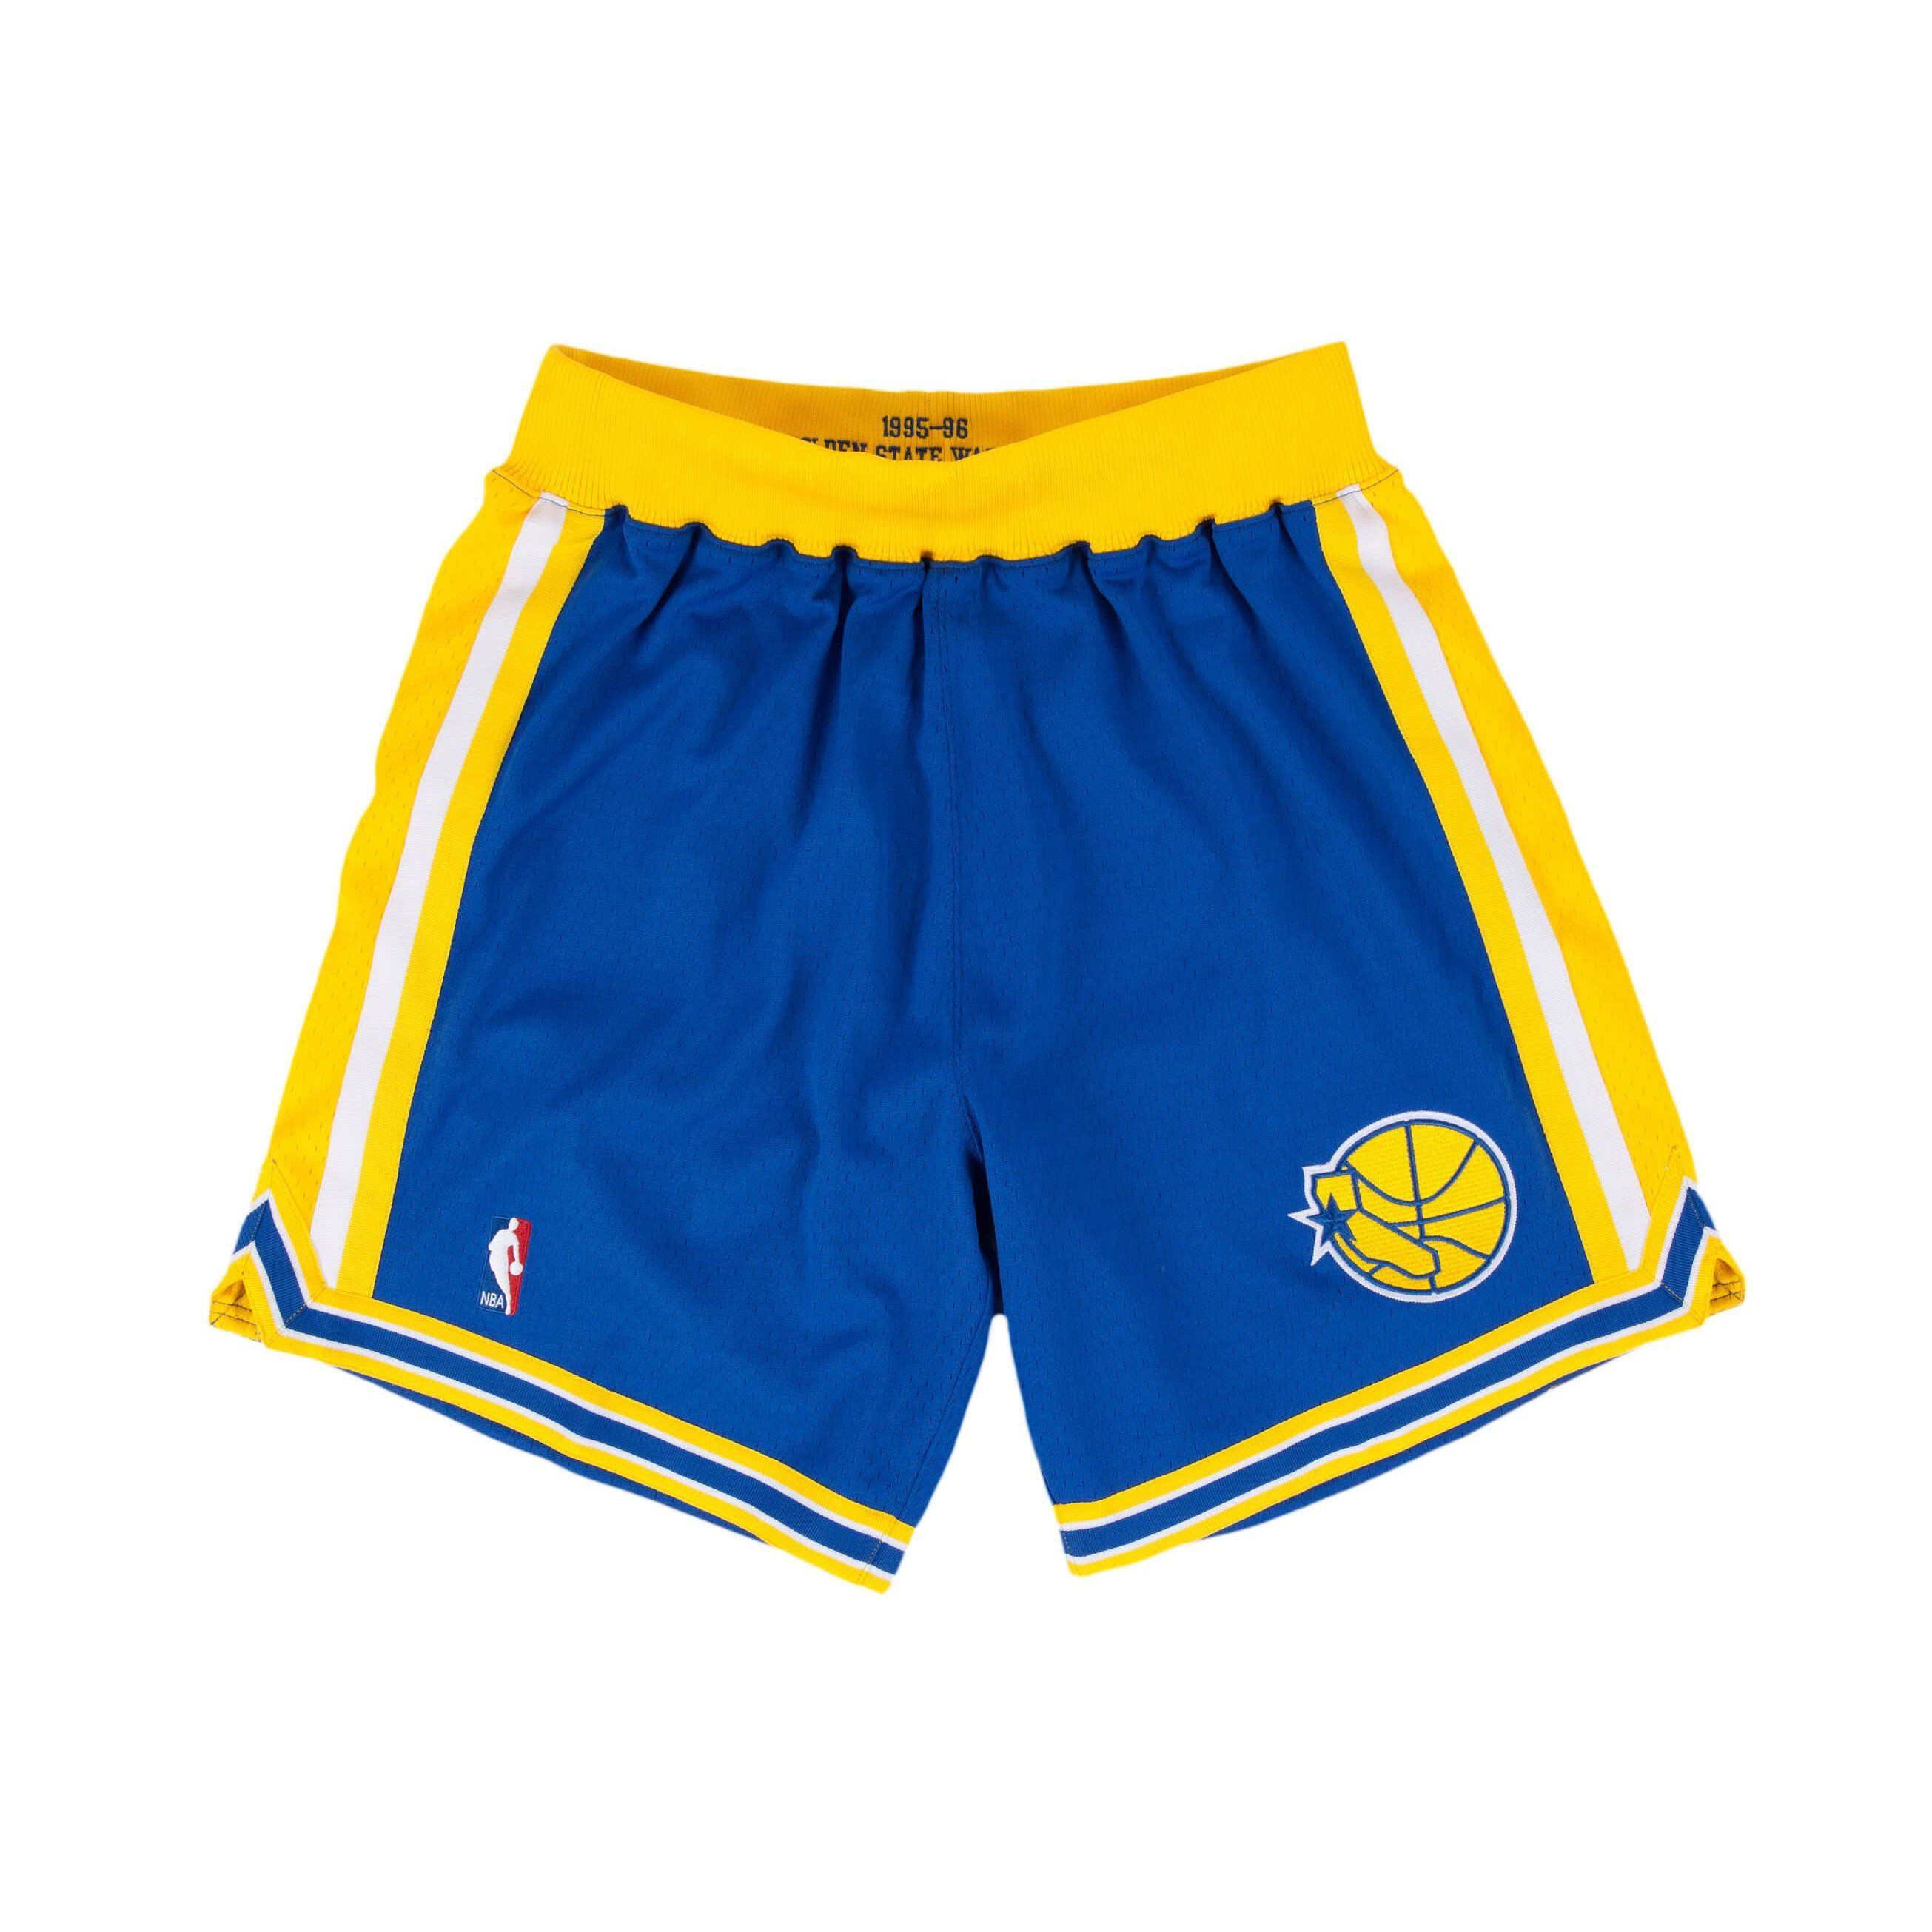 Mitchell & Ness NBA Authentic Shorts All Star East 1995-96 Blue